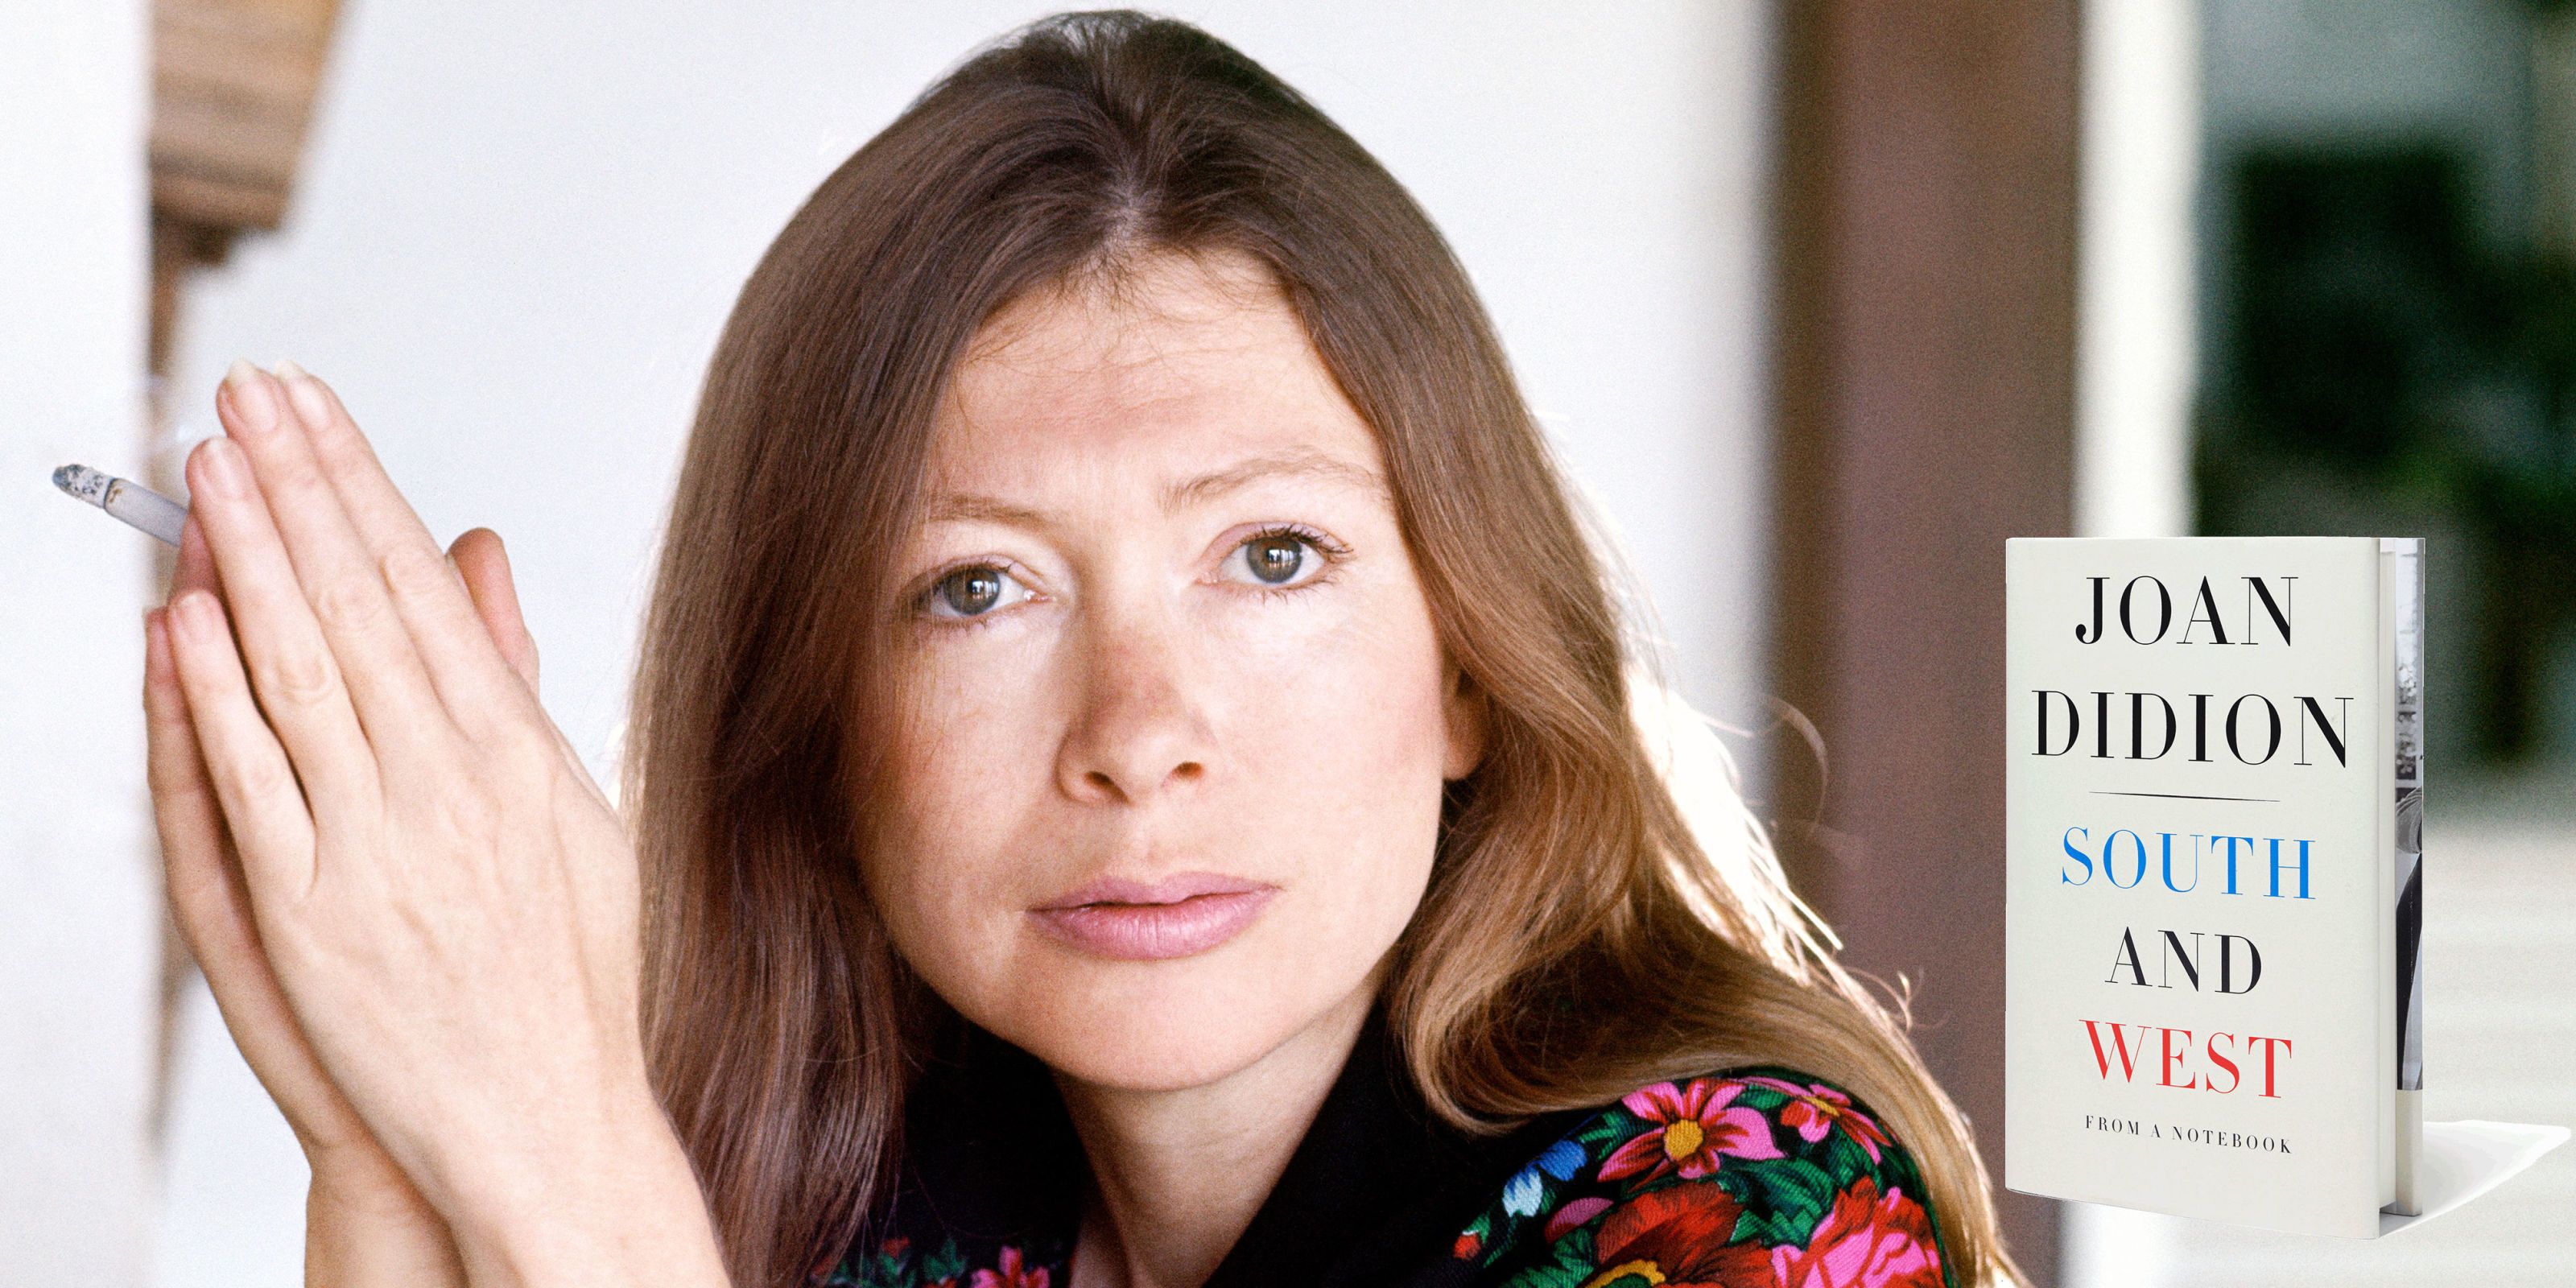 south and west by joan didion